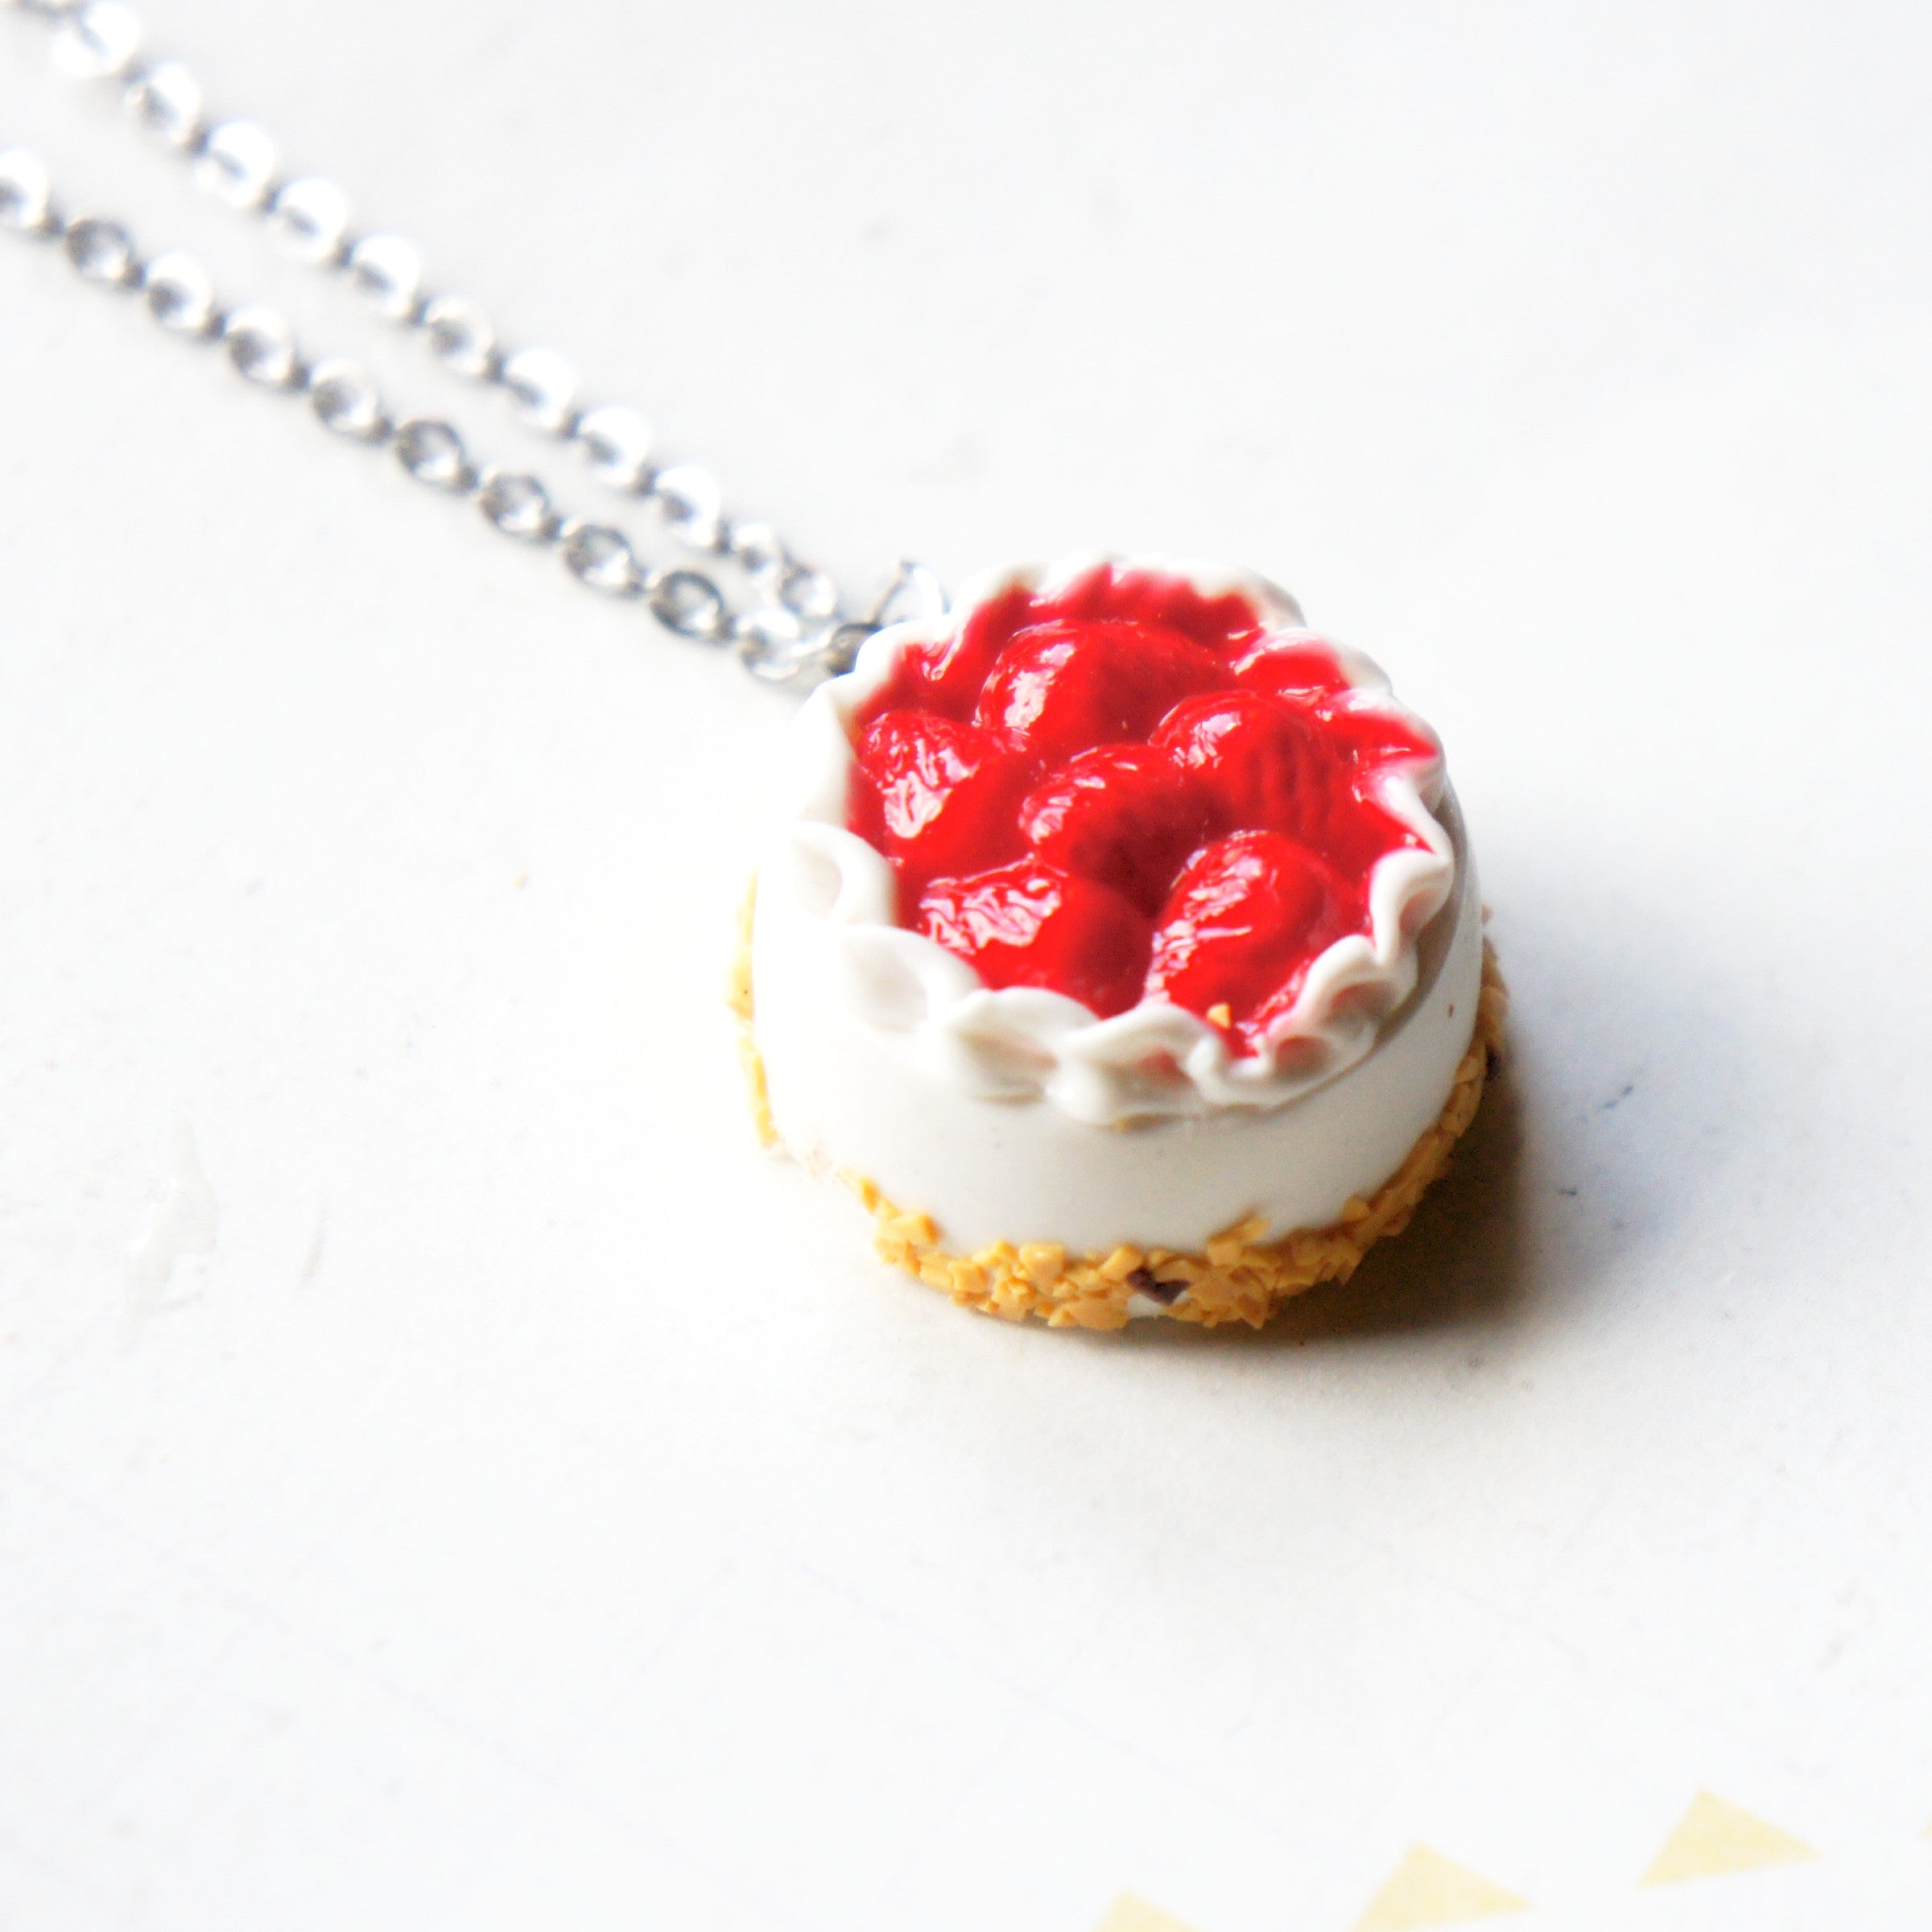 Strawberry Cheesecake Necklace - Jillicious charms and accessories